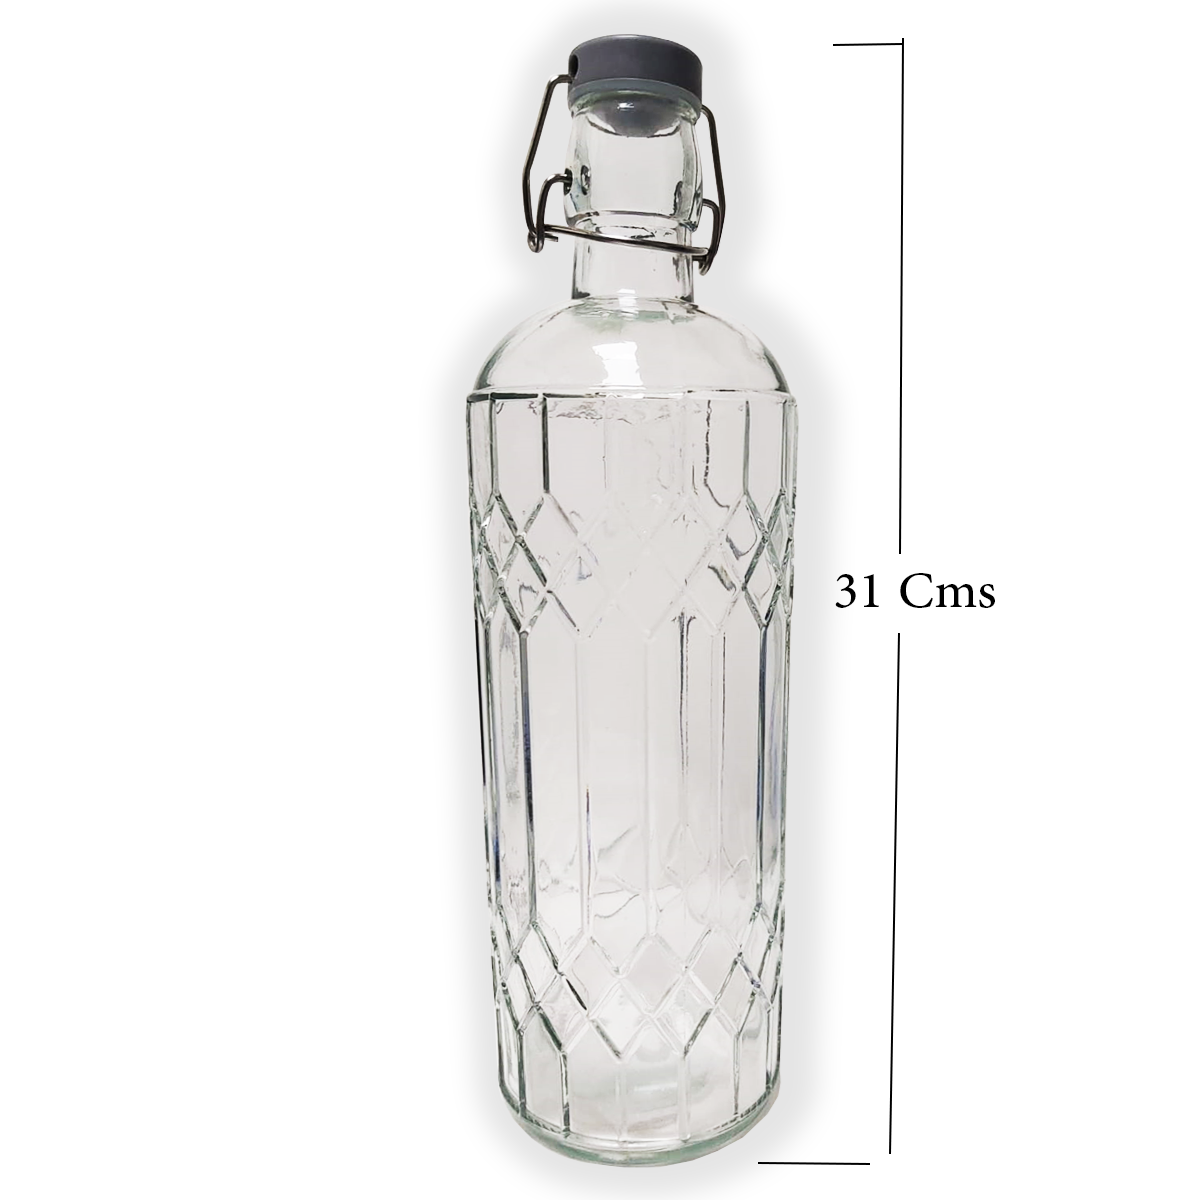 1200 ml Design Glass Bottles for Home Brewing with Easy Wire Swing Cap - 12 Pc Pack